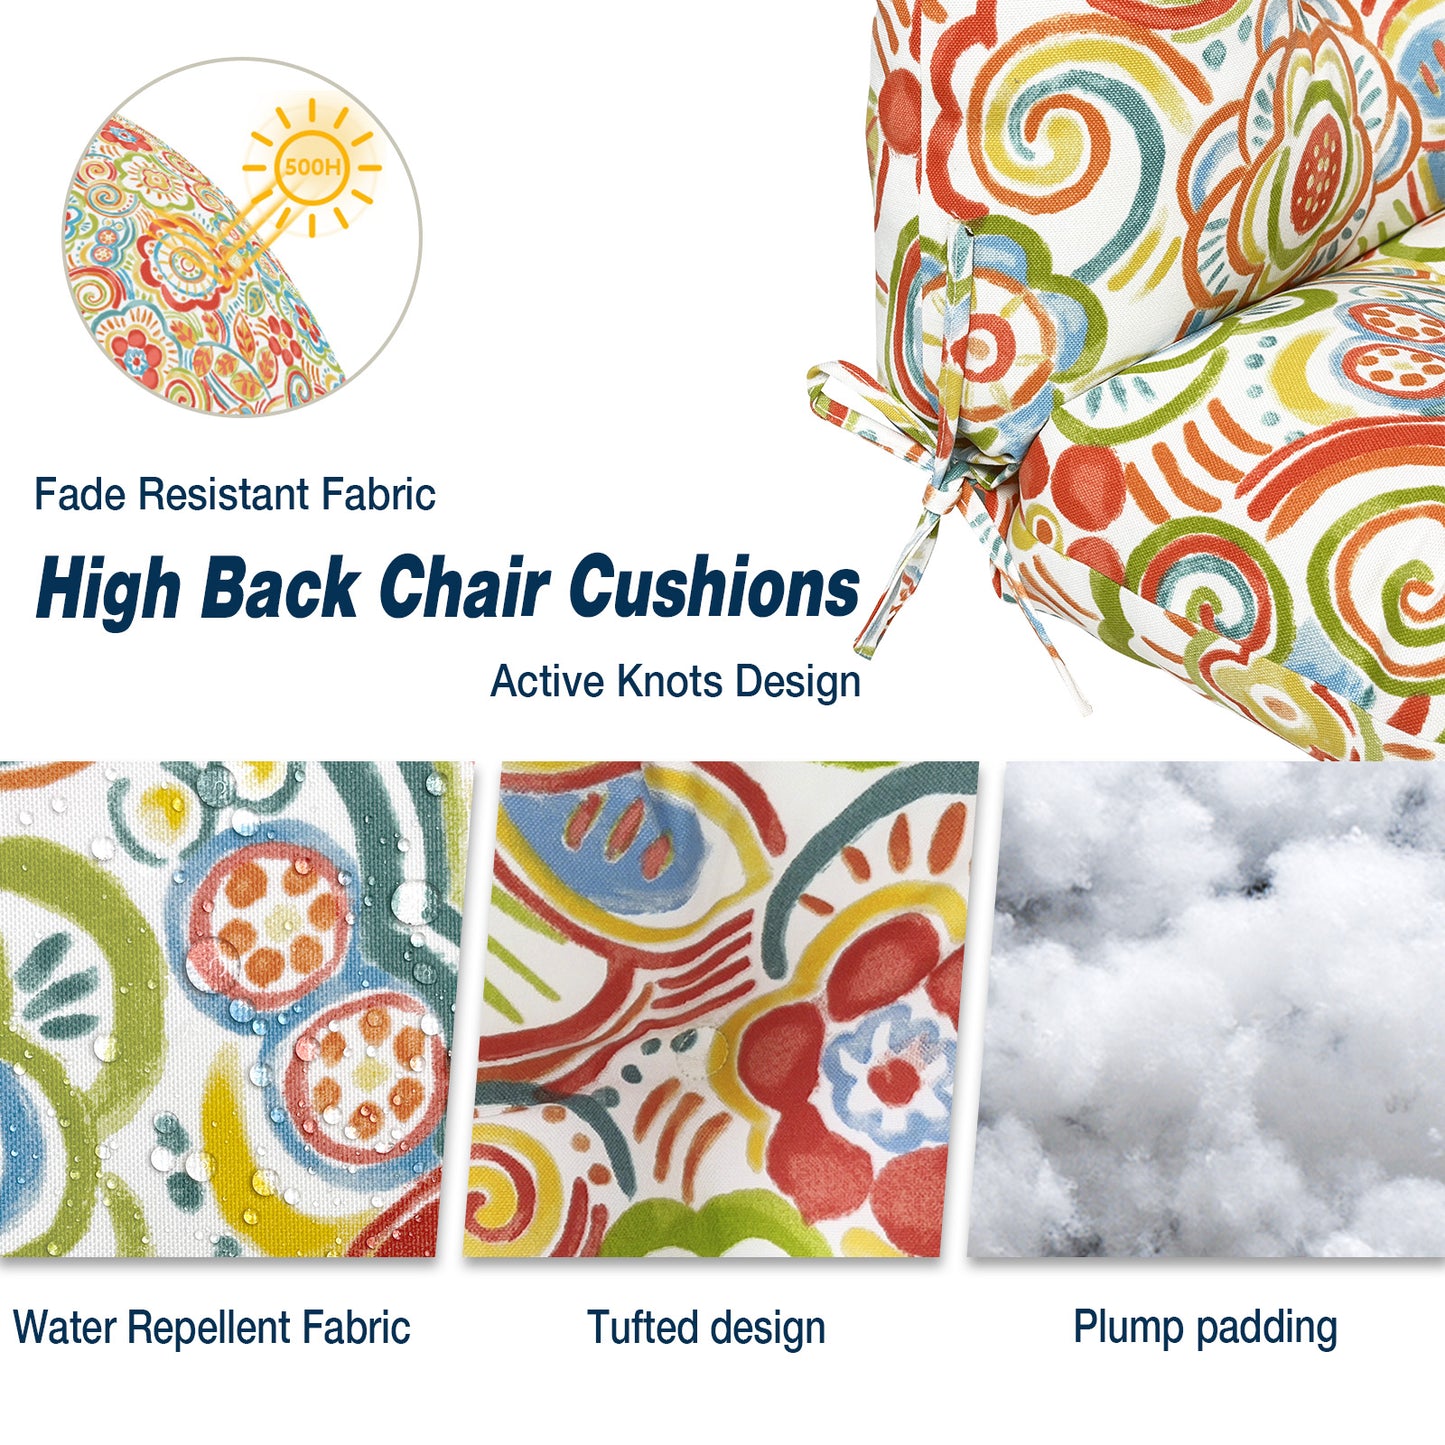 Melody Elephant Outdoor Tufted High Back Chair Cushions, Water Resistant Rocking Seat Chair Cushions 2 Pack, Adirondack Cushions for Patio Home Garden, 22" W x 20" D, Flower Multi